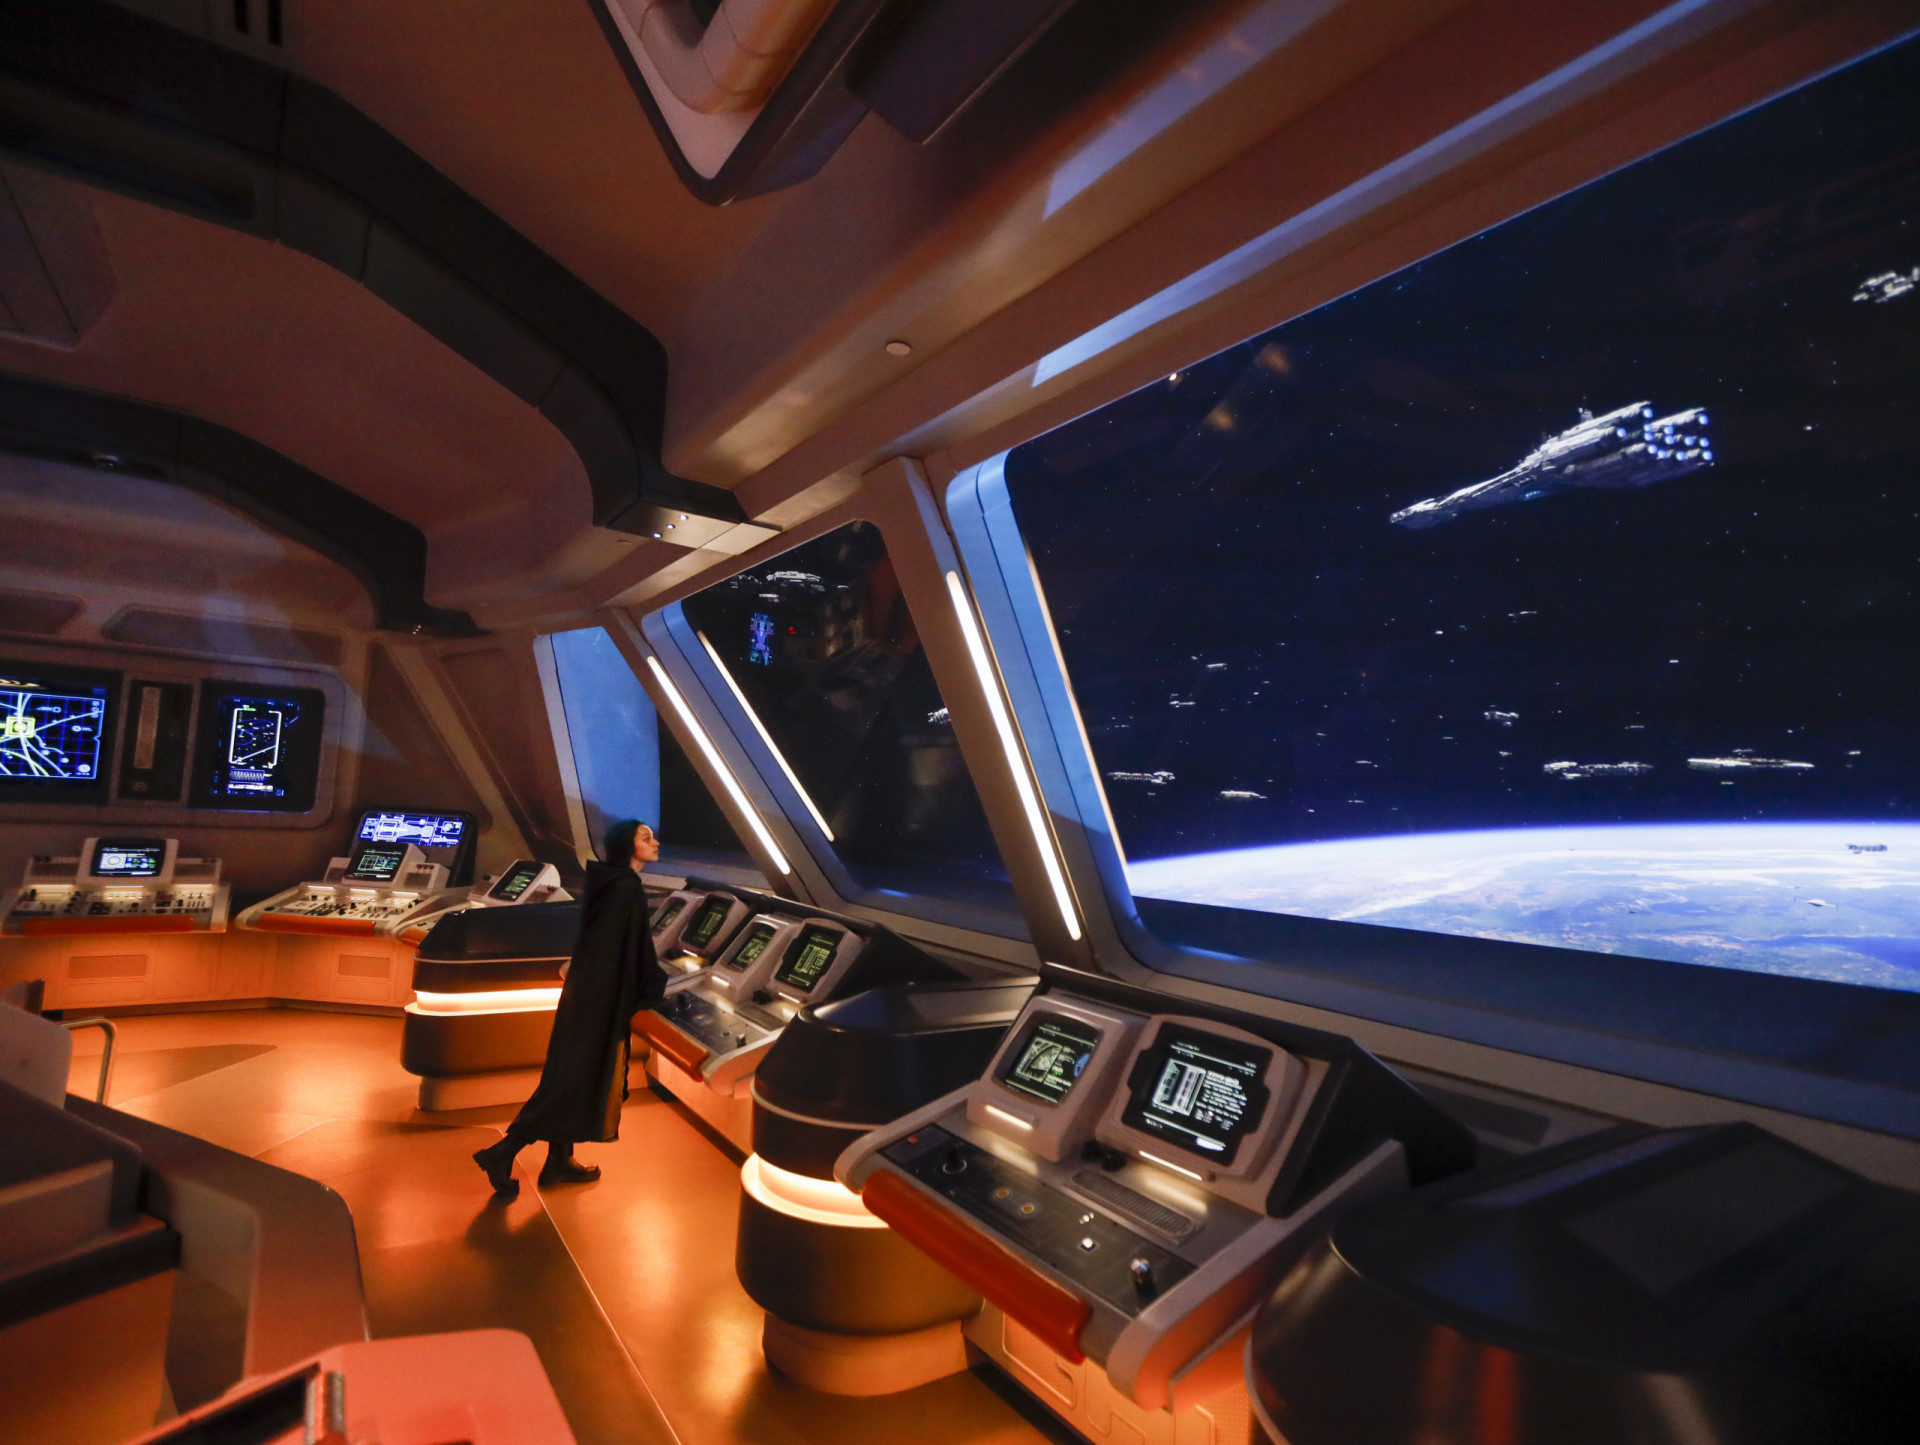 <p>The immersive Star Wars experience closed in 2023, ending its journey as a unique attraction in Disney World. Disney regarded the closure as a 'business decision.'</p><p><a href="https://www.msn.com/en-us/community/channel/vid-7xx8mnucu55yw63we9va2gwr7uihbxwc68fxqp25x6tg4ftibpra?cvid=94631541bc0f4f89bfd59158d696ad7e">Follow us and access great exclusive content every day</a></p>